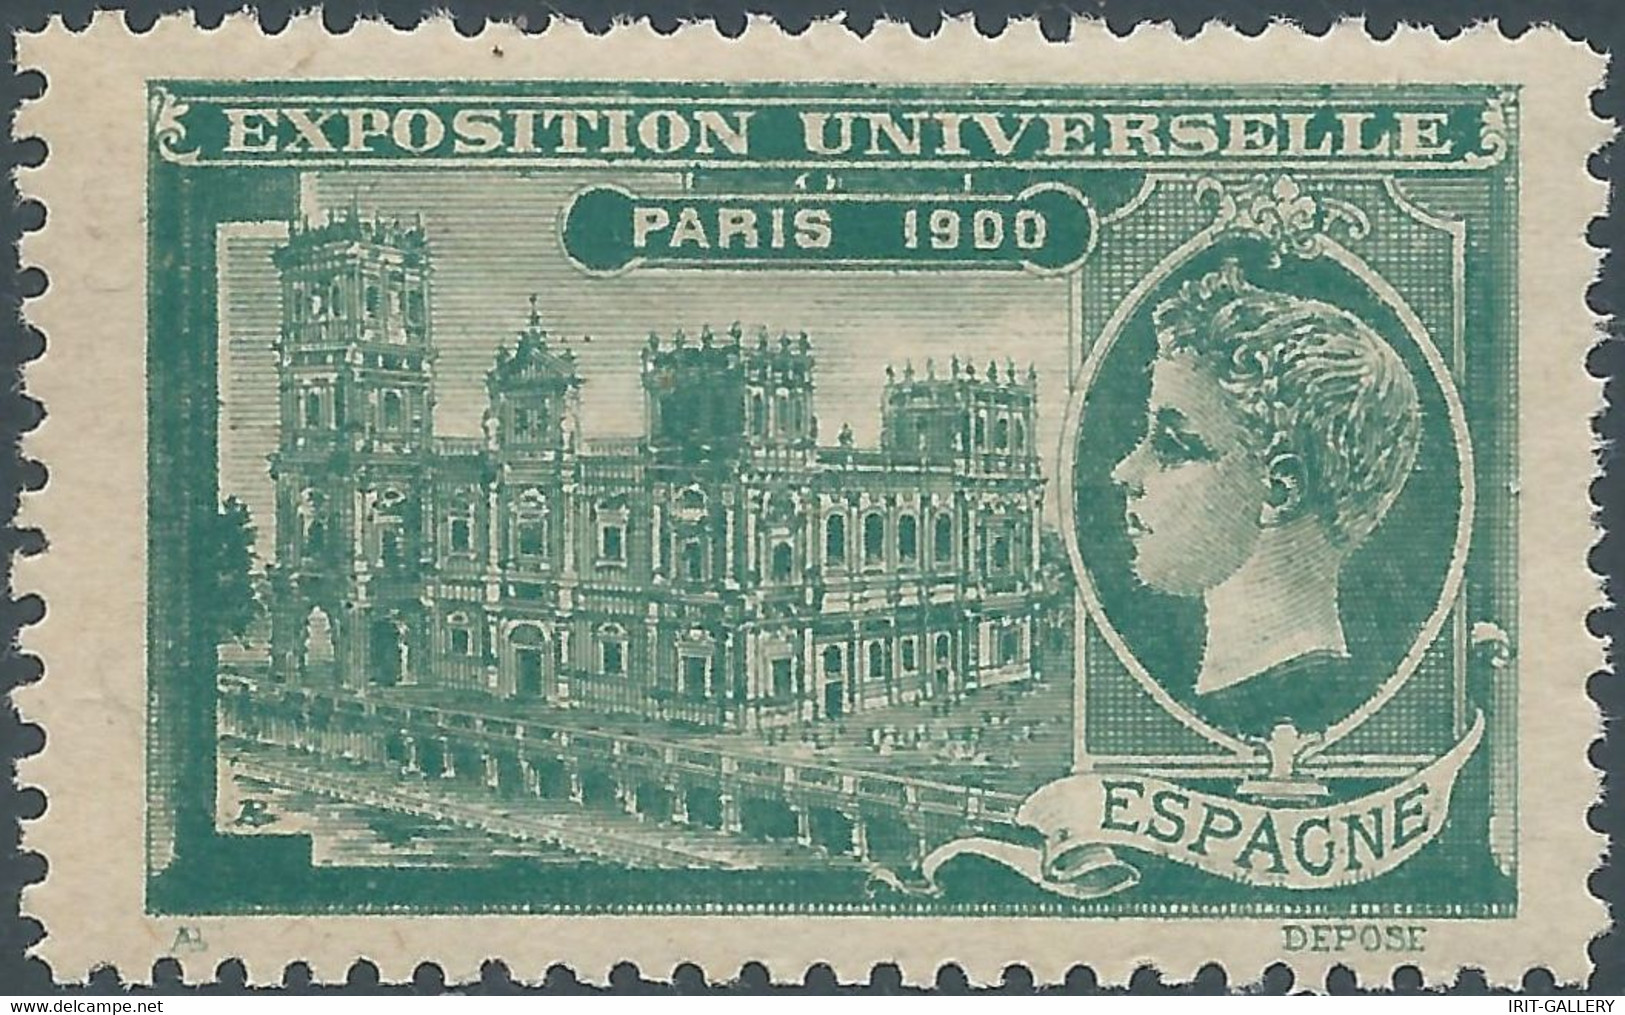 France,Paris 1900 UNIVERSAL EXHIBITION OF Spagne - Spain ,Trace Of Hinged - 1900 – Paris (France)